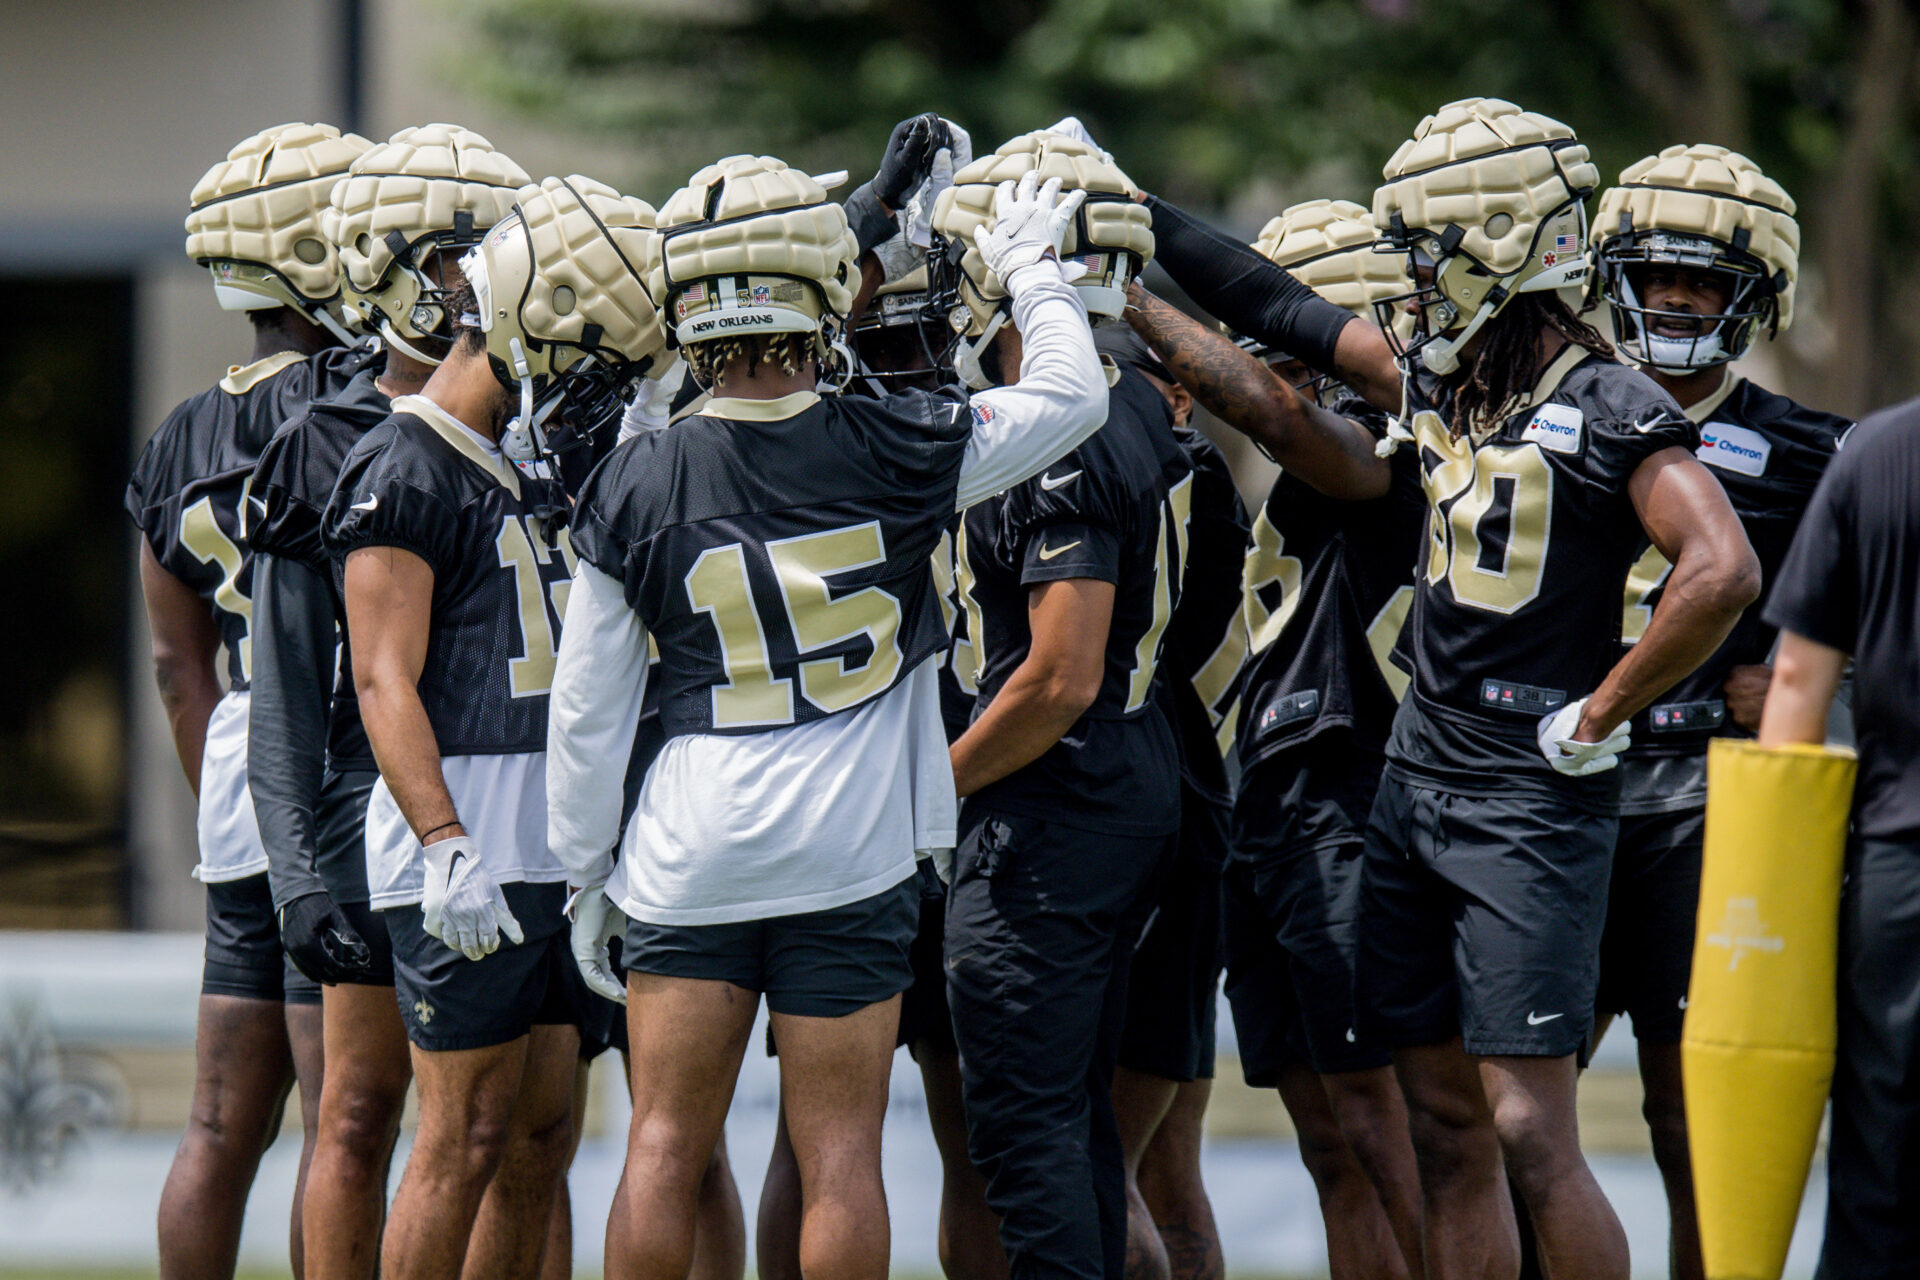 New Orleans Saints players in practice jersey huddled with their hands on a single player's helmet